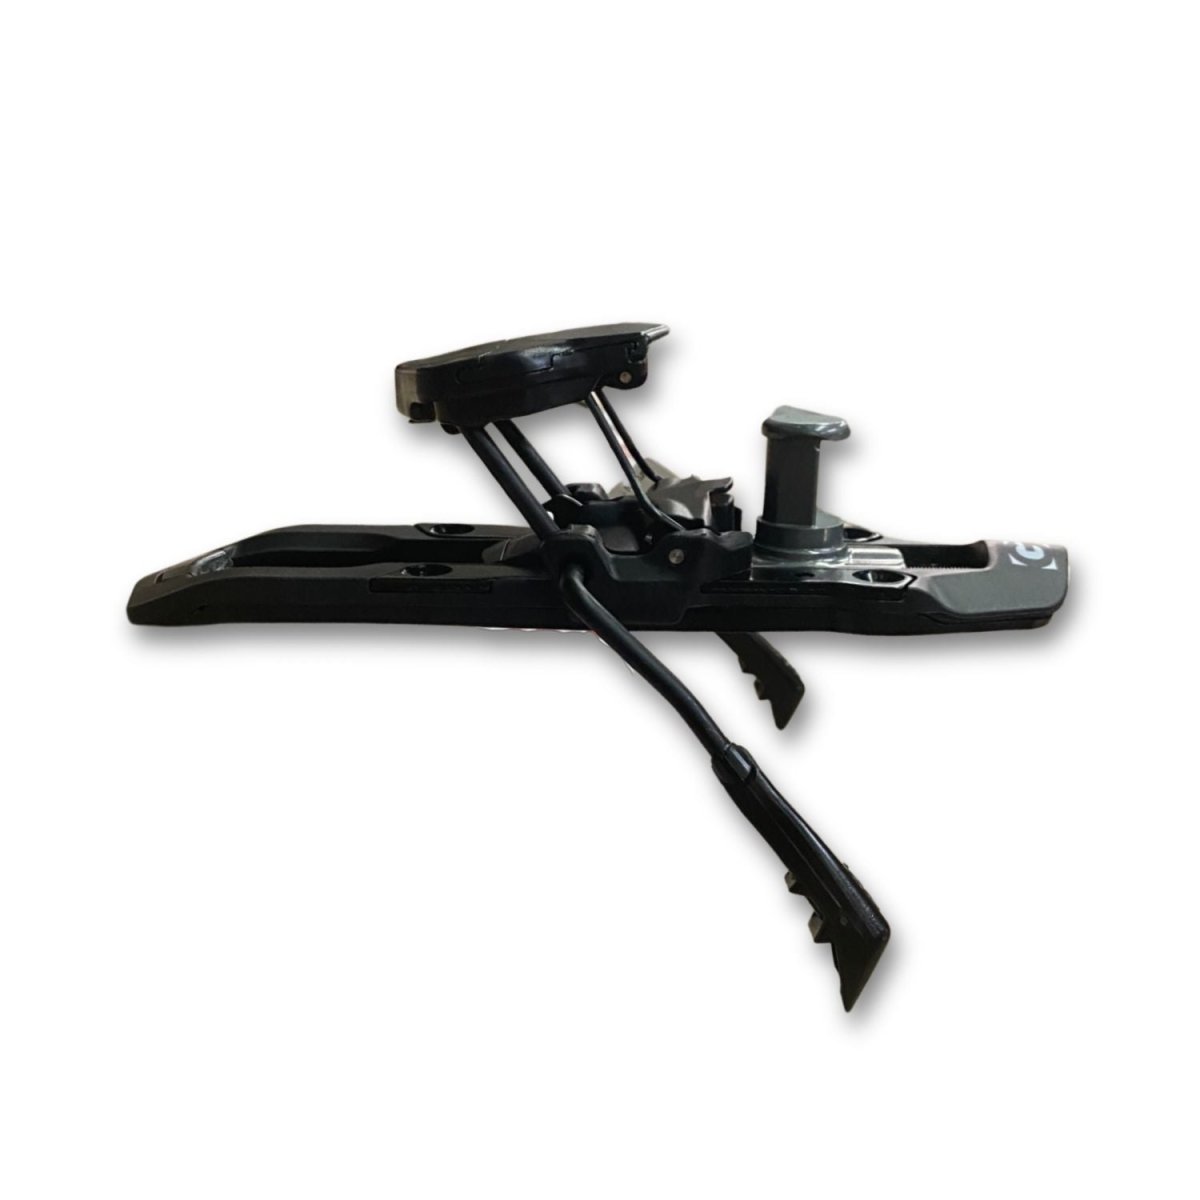 ION Demo Baseplate with Brake Assembly (Black) - Parts - G3 Store [CAD]